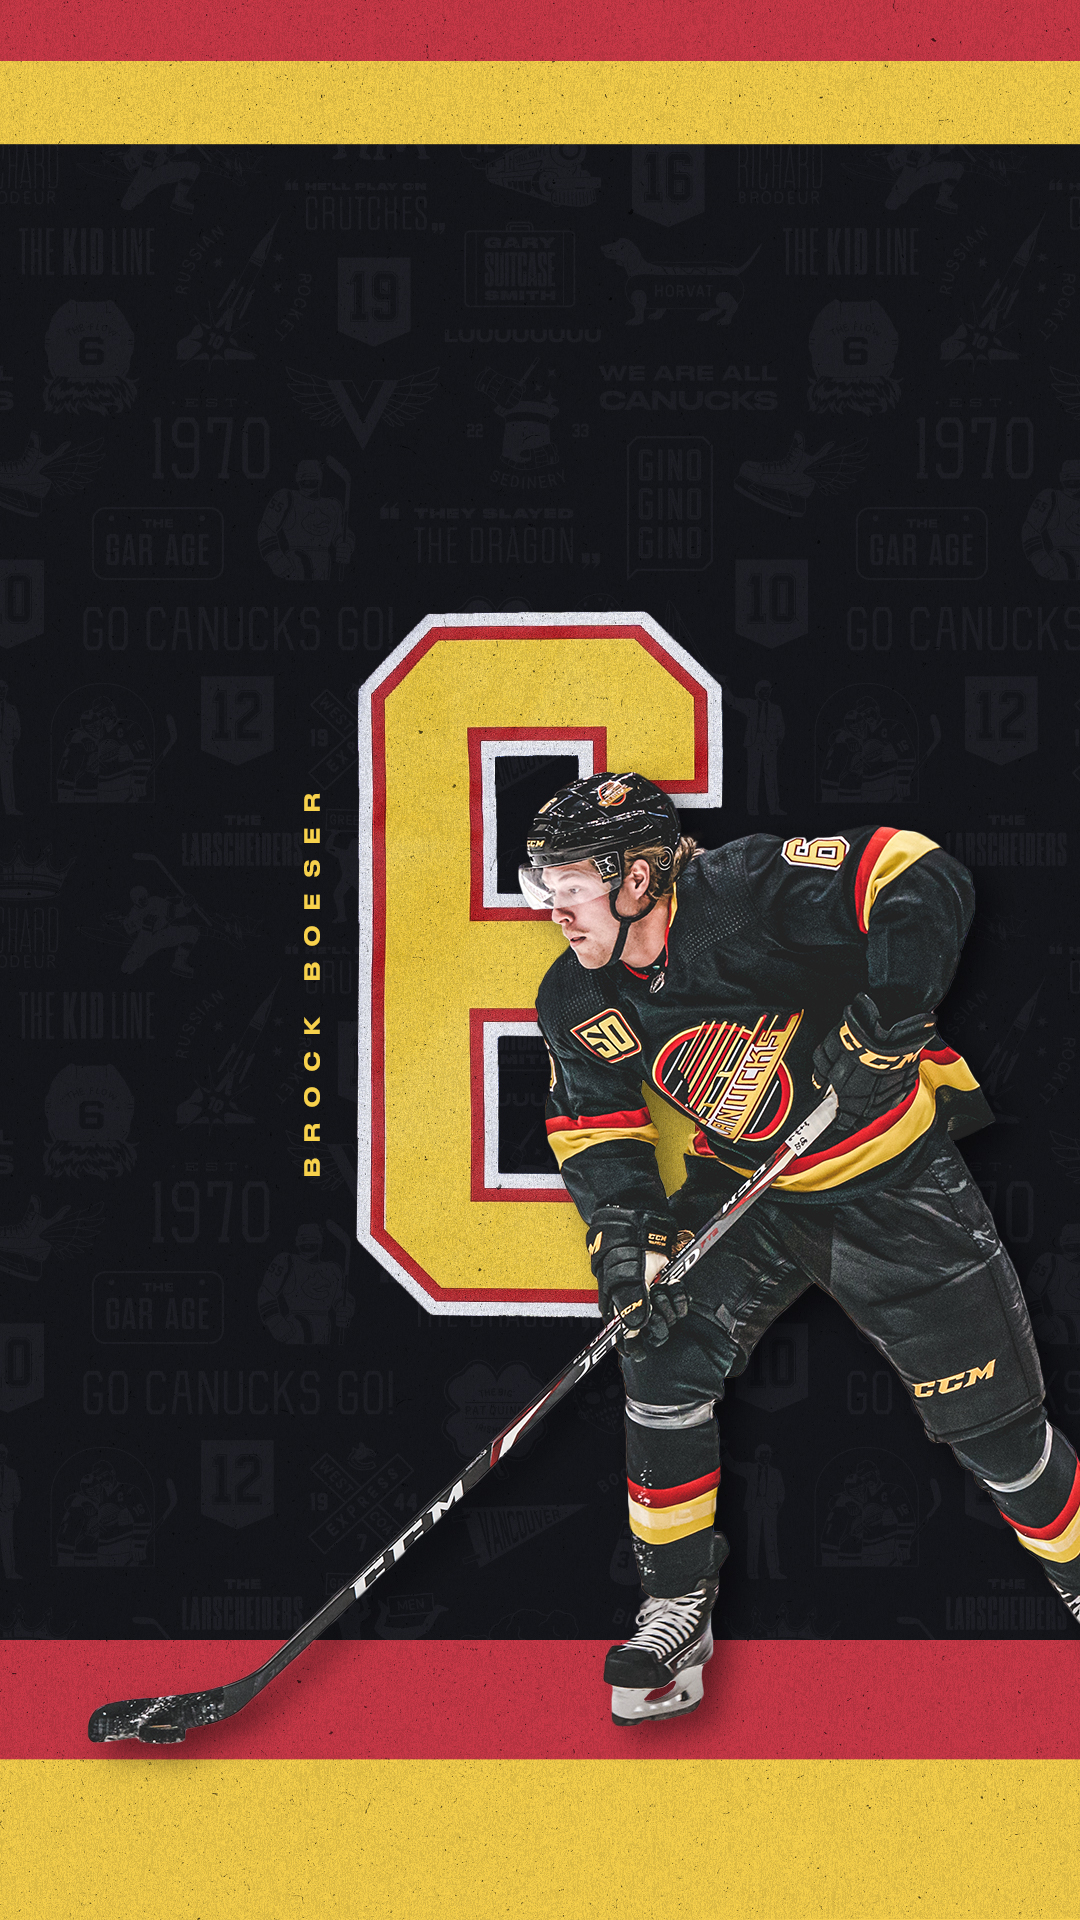 1080x1920 Wallpapers | Vancouver Canucks